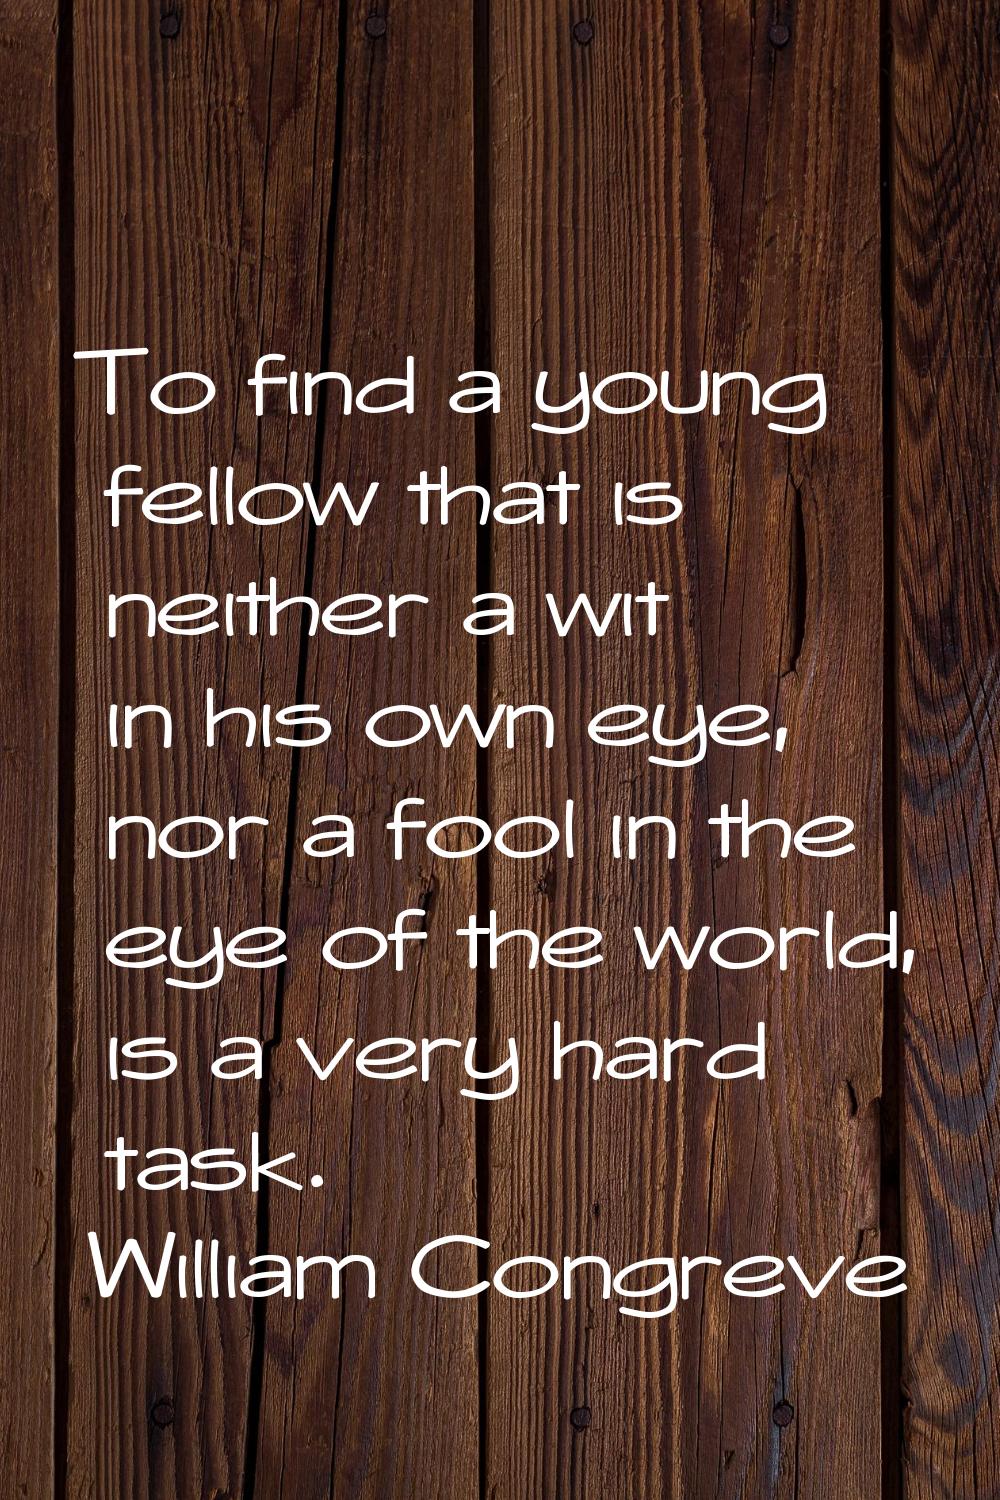 To find a young fellow that is neither a wit in his own eye, nor a fool in the eye of the world, is